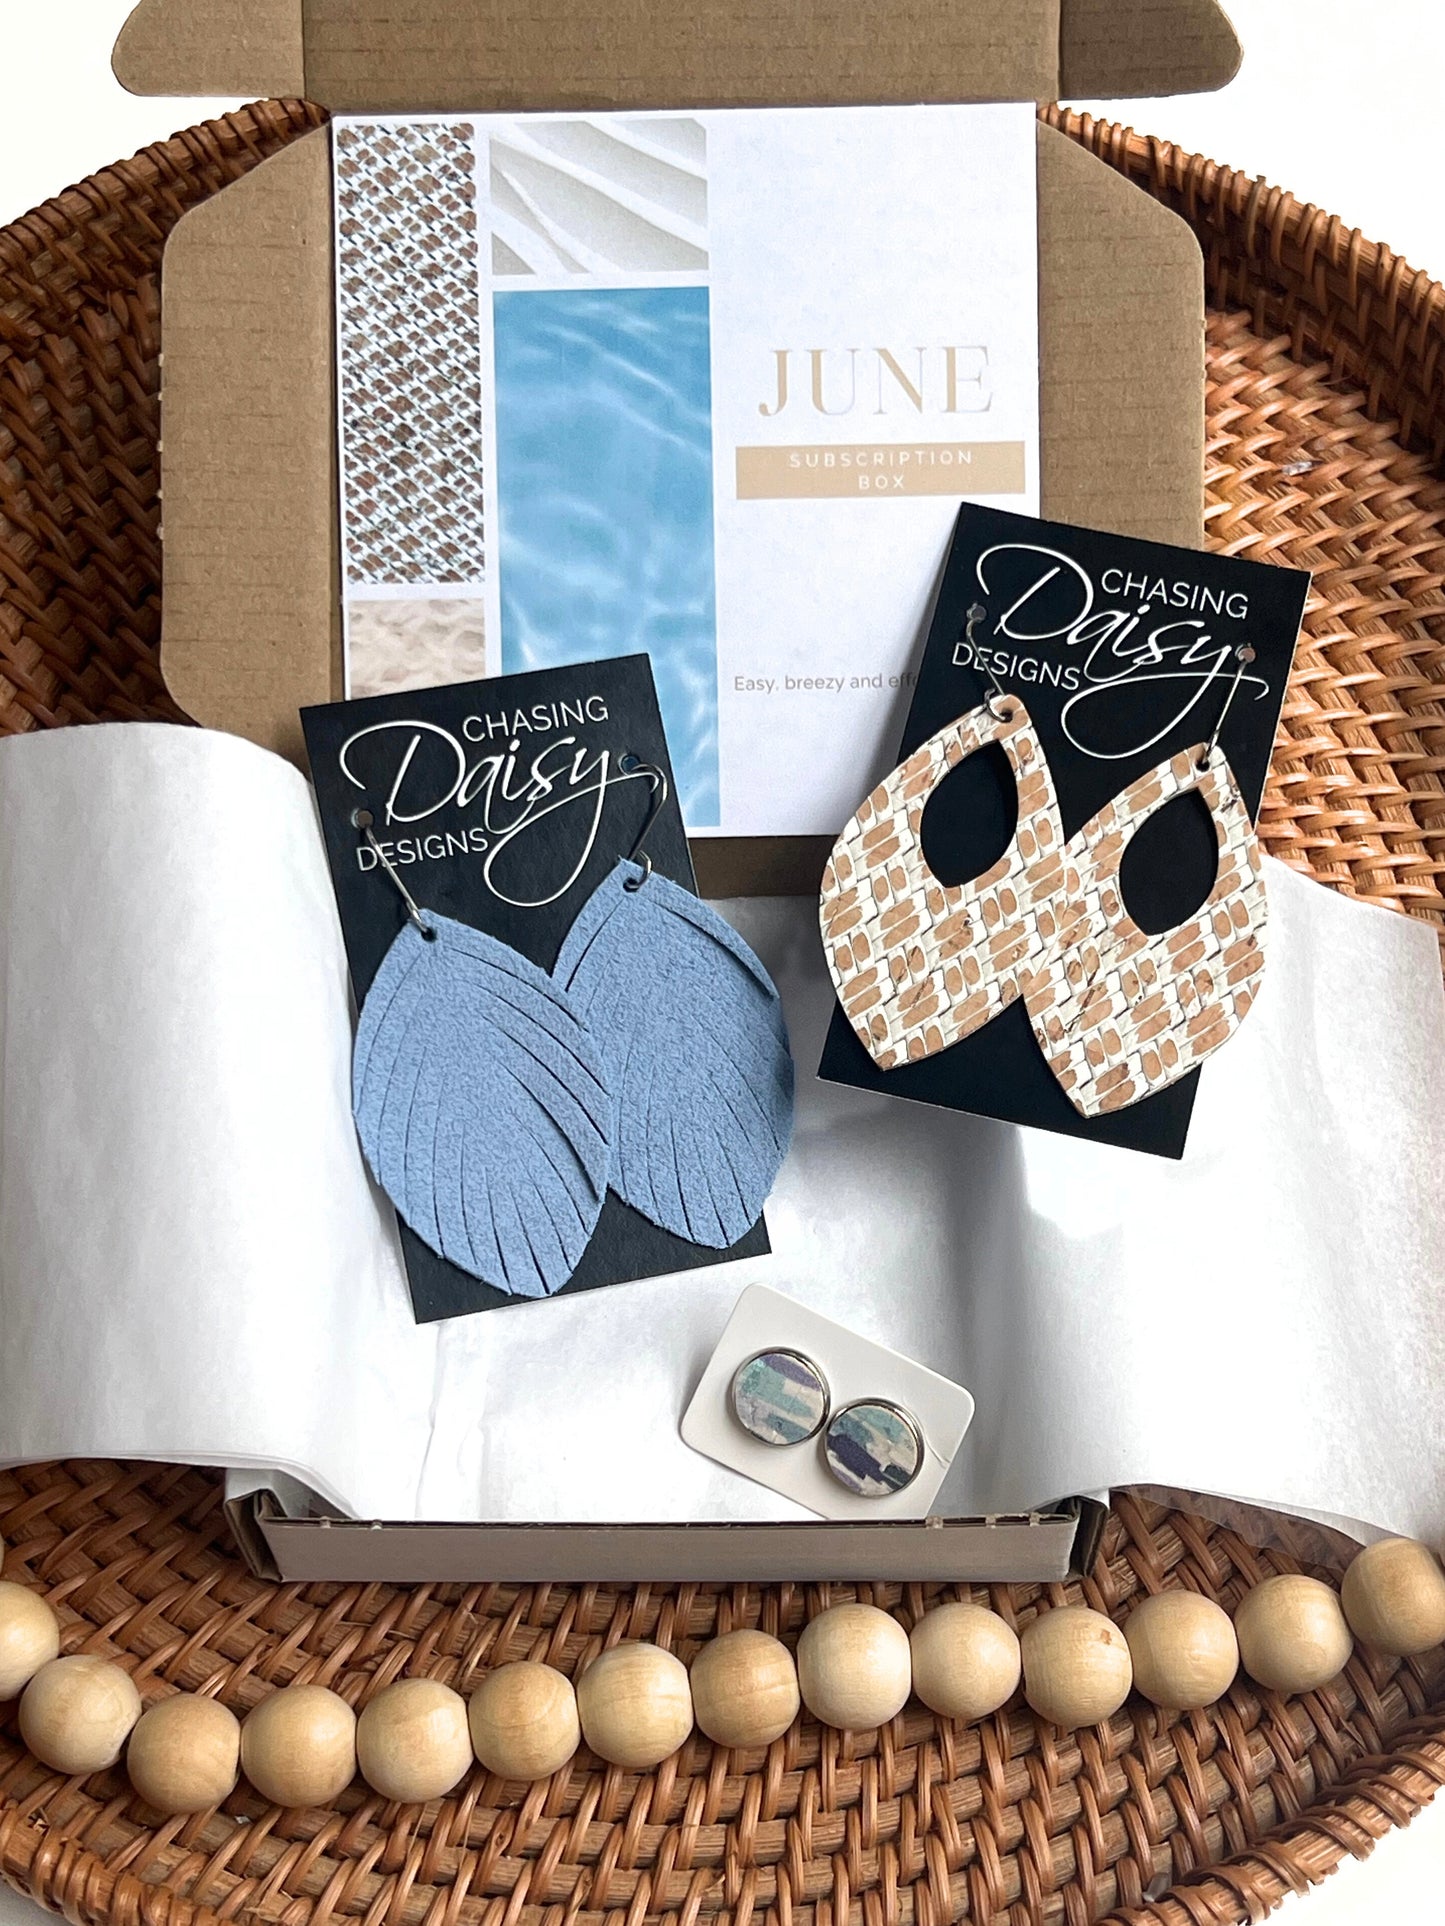 Monthly Earring Box Subscription